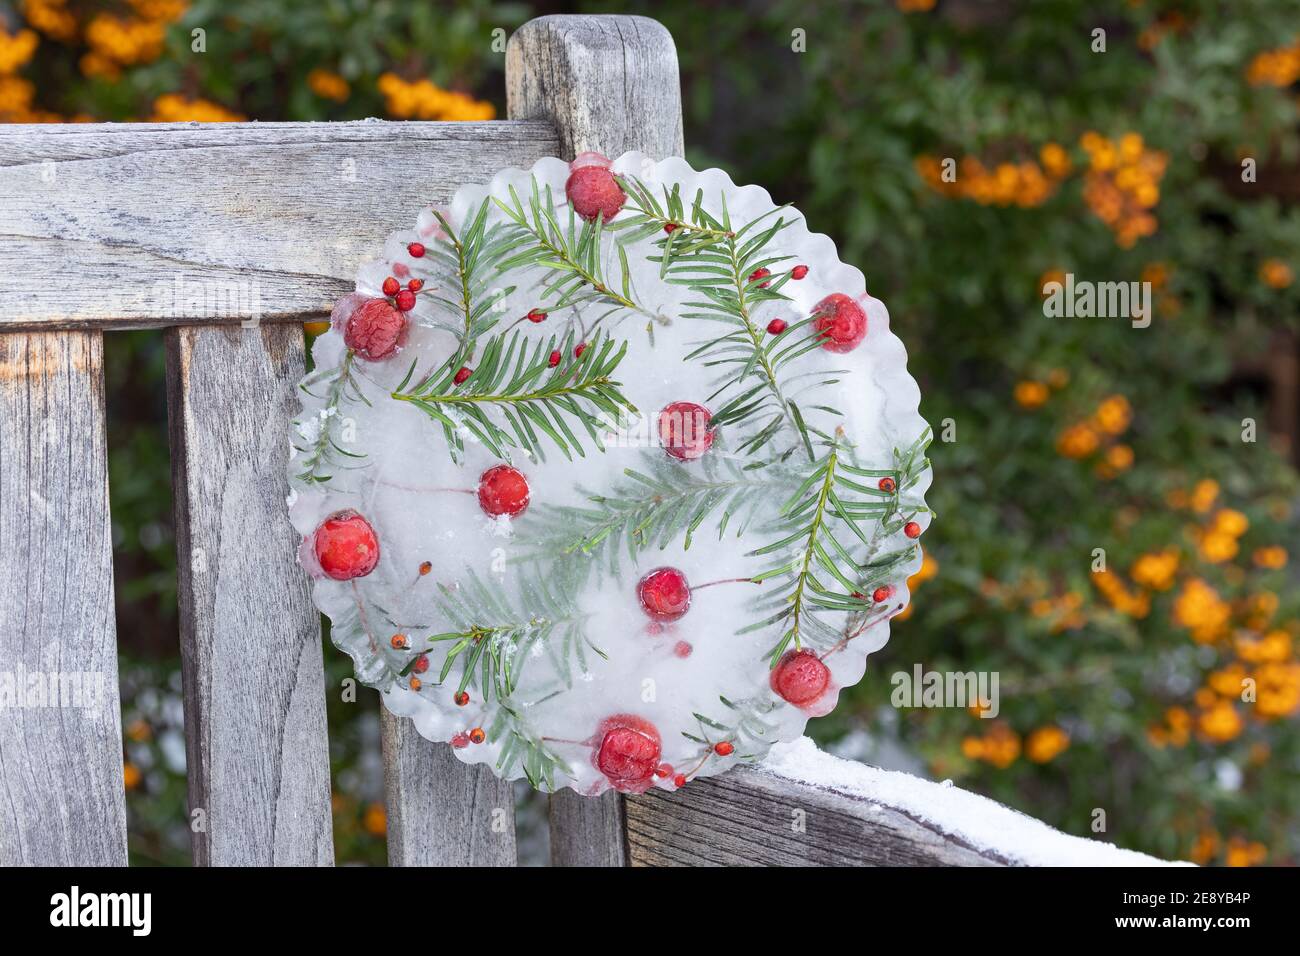 ice disc with crab apples and yew branches as winter garden decoration Stock Photo